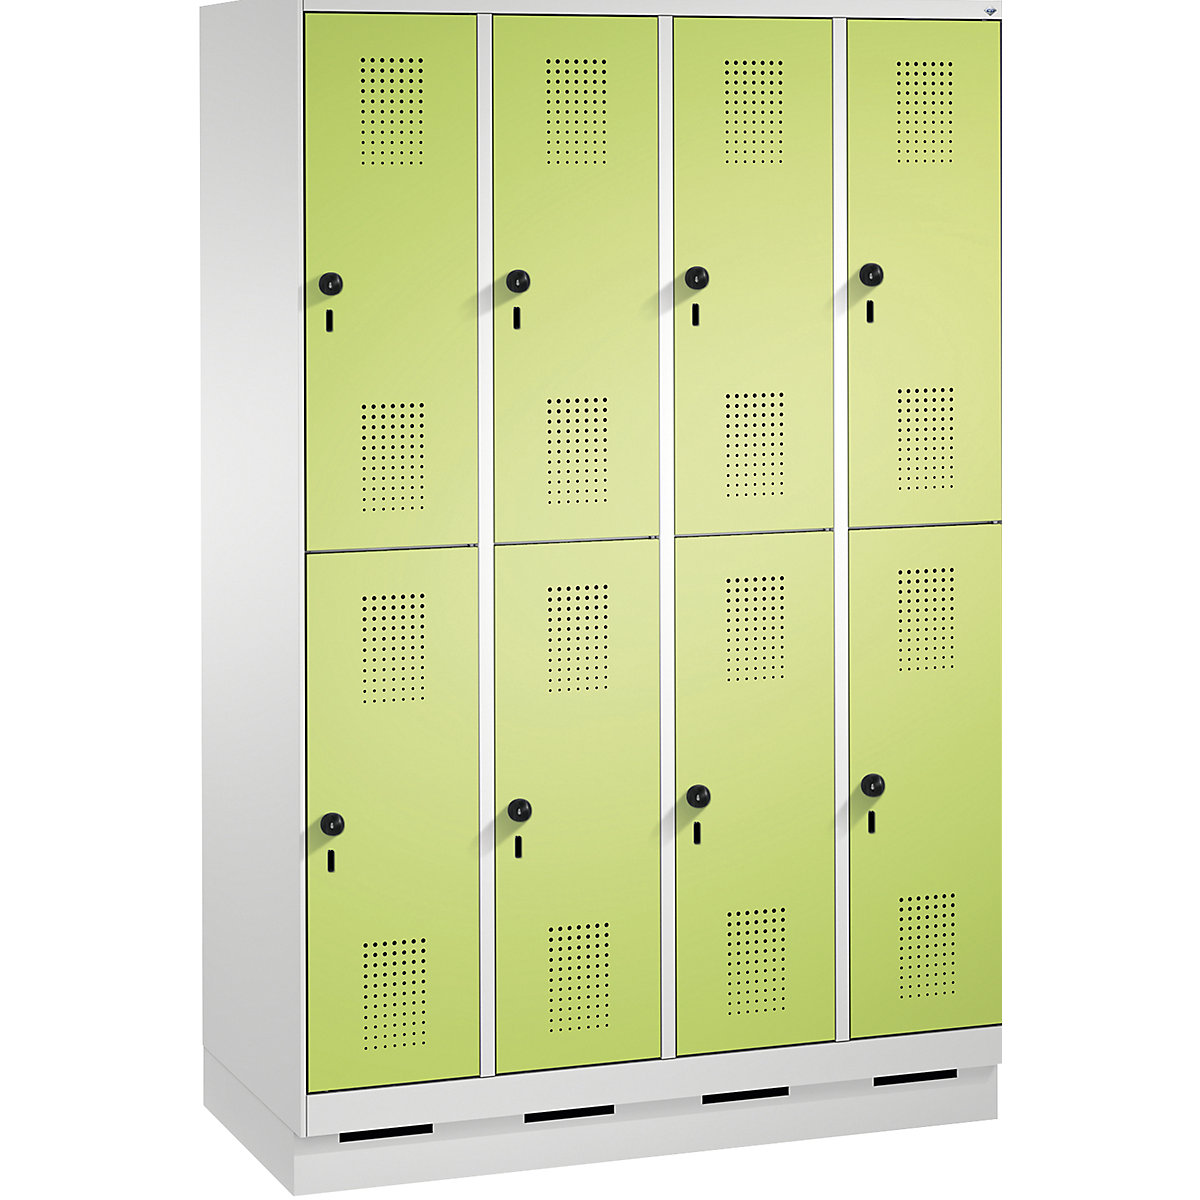 EVOLO cloakroom locker, double tier, with plinth – C+P, 4 compartments, 2 shelf compartments each, compartment width 300 mm, light grey / viridian green-8